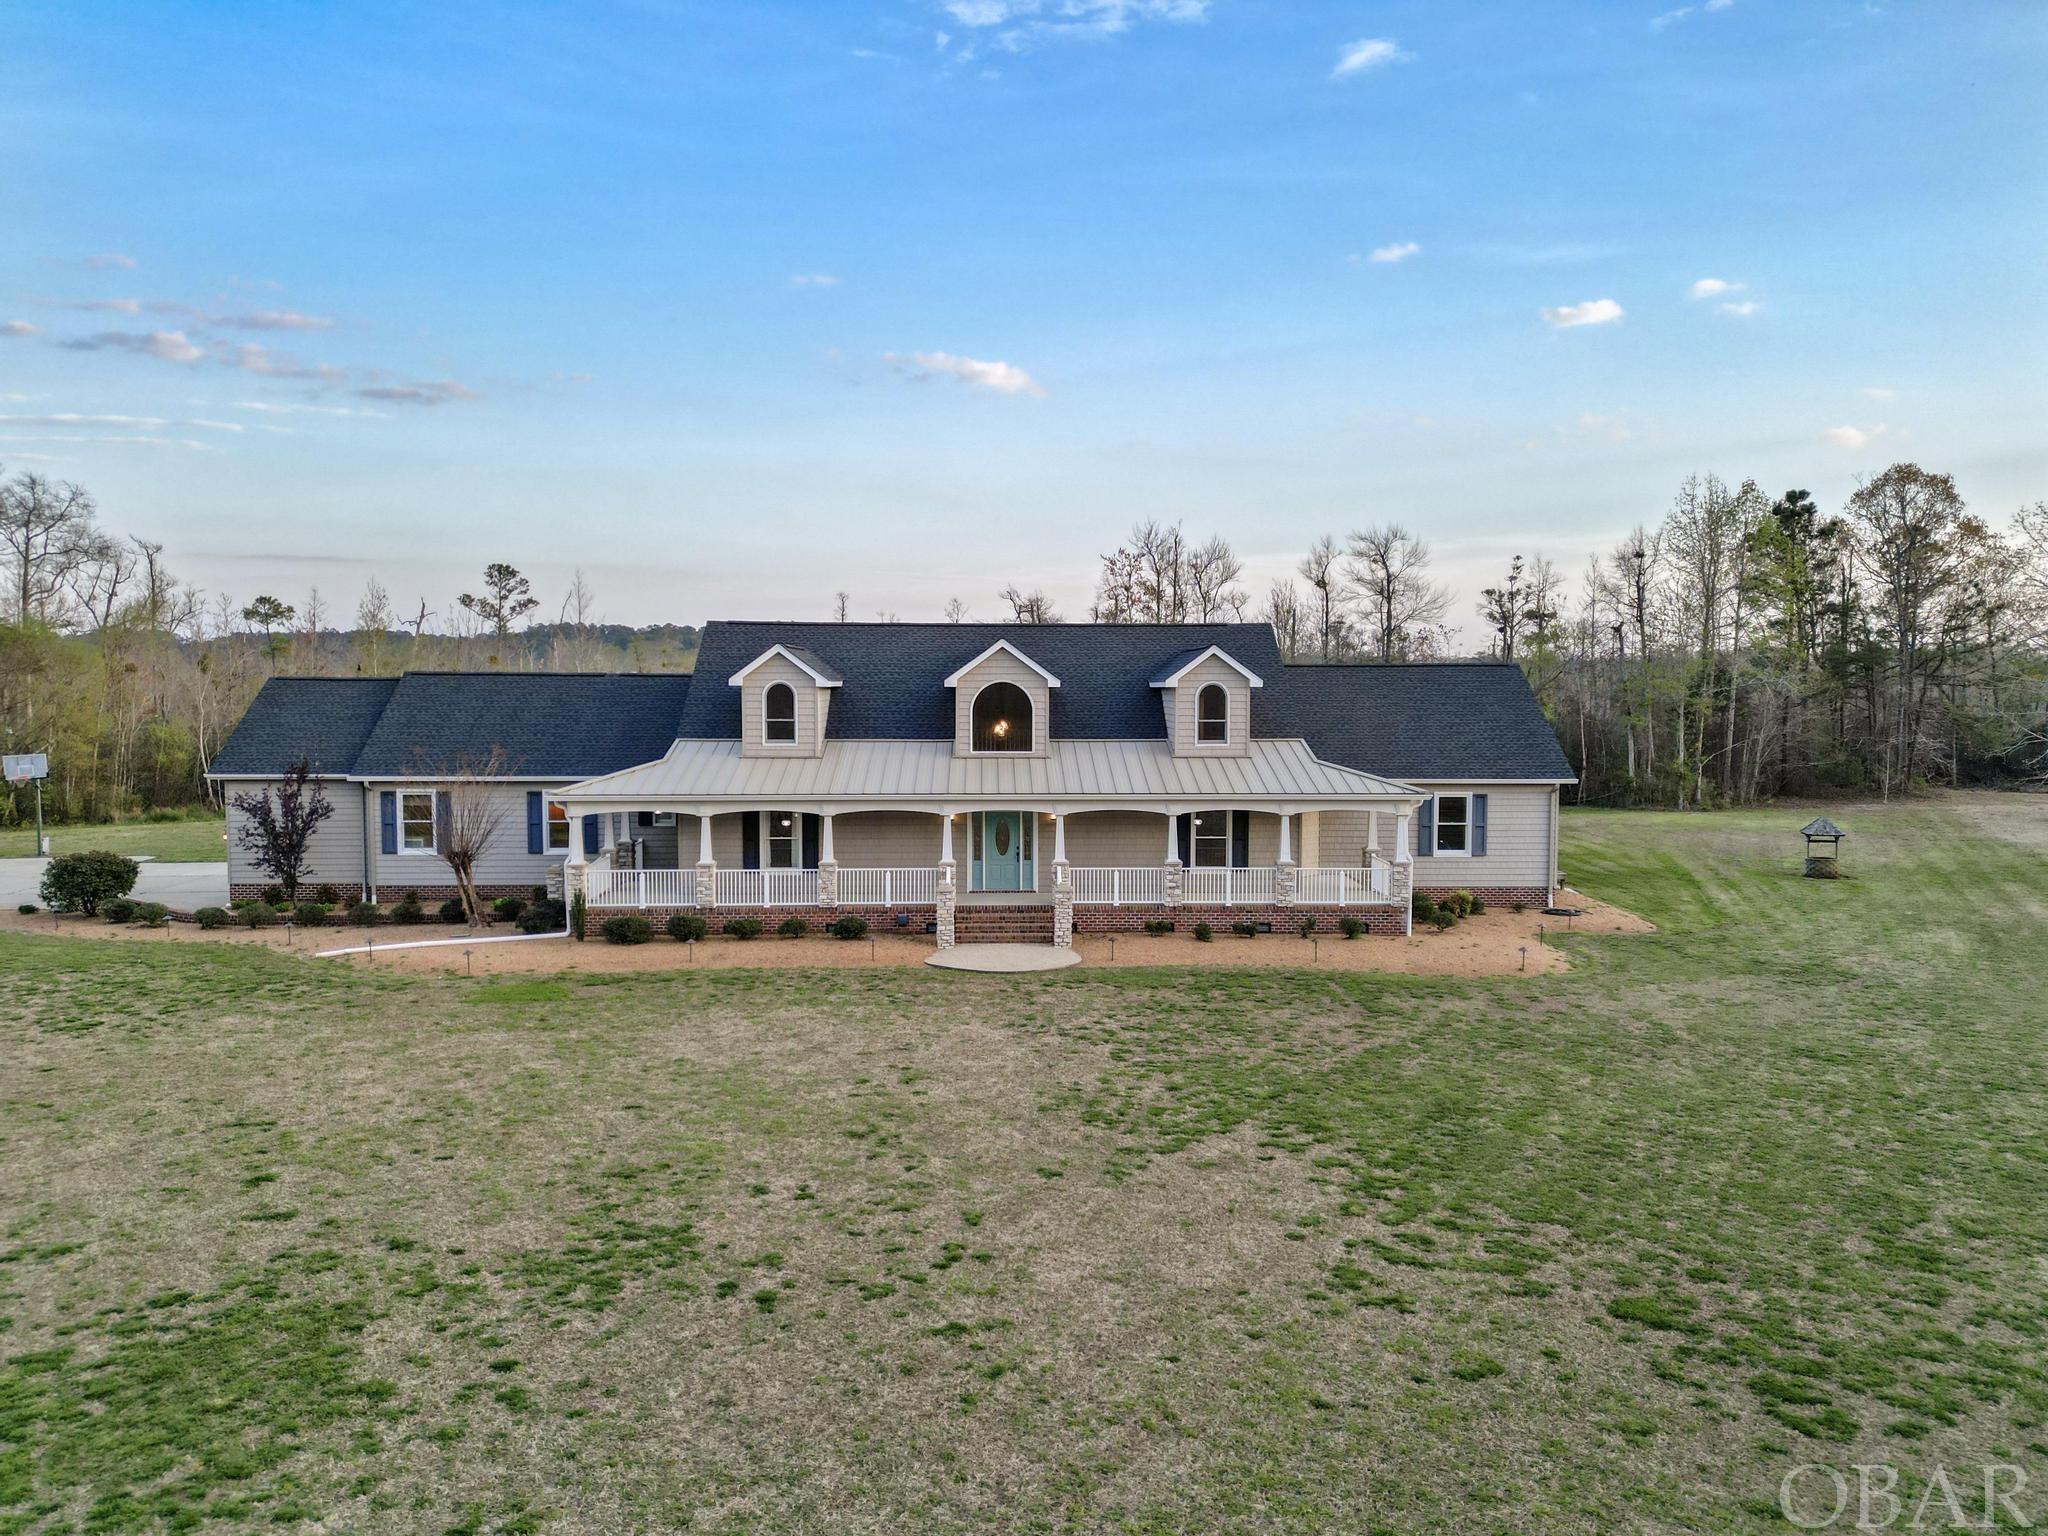 Property is comprised of 10.32 acres & features a 5,061 square foot house with 4 bedrooms and 3 full & 2 half bathrooms. House features a foyer, great rm, sunroom, dining rm, playroom, mudroom, & laundry rm. Double-sided stone fireplace in great rm & sunroom, Great room w/ surround sound wiring, built-in bookshelves & TV stand. Kitchen has custom cabinets w/quartz countertops, a commercial shaver ice maker, a Wolf pull-out microwave, & double oven, electric cooktop, dishwasher, pull-out trash bin, farm sink, pot filler. Eat-in kitchen w/a permanent table & bench stools. Grand bedroom has trey ceiling, office, custom walk-in closet w/washer & dryer, sink, large vault safe w/ample shelving & storage. Grand bathroom has jetted tub, 2 vanities w/sinks & ample storage, make-up table w/ quartz countertops, a tile walk-in shower w/ 2 shower heads, rain shower head, & spray jets, as well as a water closet., Upstairs has 3 large bedrooms, a hall bathroom with double sinks & quartz countertops, a large den/playroom with a storage closet, & a full bathroom with a tile shower & quartz countertops. Laundry rm w/custom cabinets w/quartz countertops, farm sink,& toilet. Double car garage w/cabinets & shelving, Outdoor area features a covered patio with kitchen that includes a grill, refrigerator, sink, & ceiling fan, all under a wood ceiling. Second covered patio off the sunroom is furnished w/Rattan furniture. There's a stone firepit w/sectional seating & gas propane hookup. Inground pool has a heater, along with a pool house. Property also features a cornhole/horseshoe pit, 3 detached garages with plenty of space, a covered shed for equipment, and a covered building for big farm equipment & workshop with a garage door. The property is fully landscaped, with four zones of irrigation in the front yard& a pump house. Crawl space is encapsulated & lighted. Property has a fully wrap-around porch w/stone columns. A rare opportunity to own a one of a kind home.